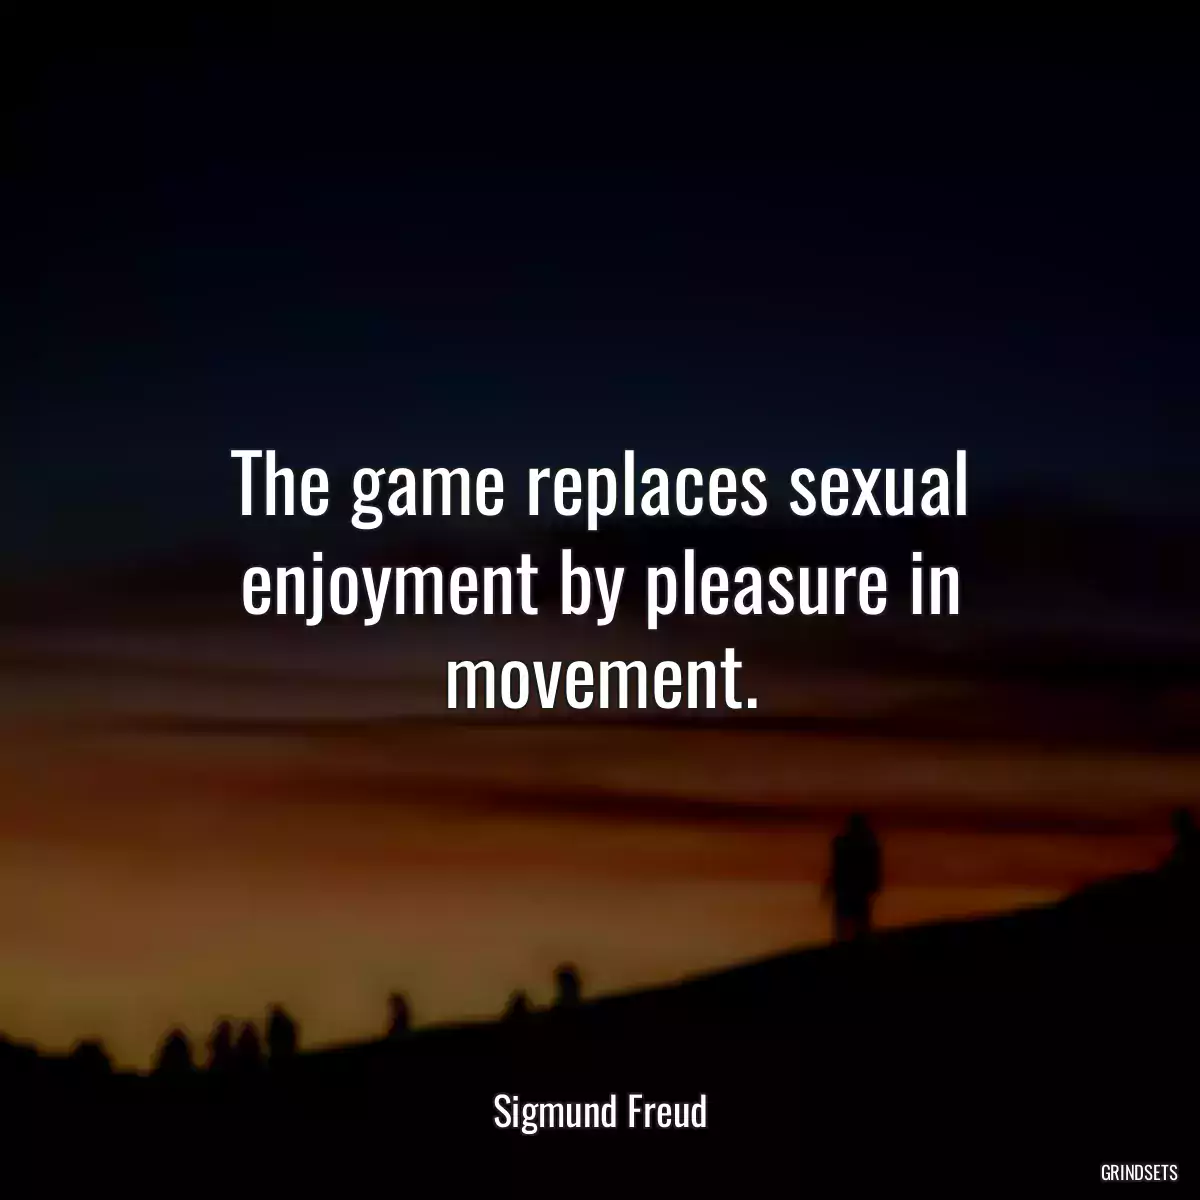 The game replaces sexual enjoyment by pleasure in movement.